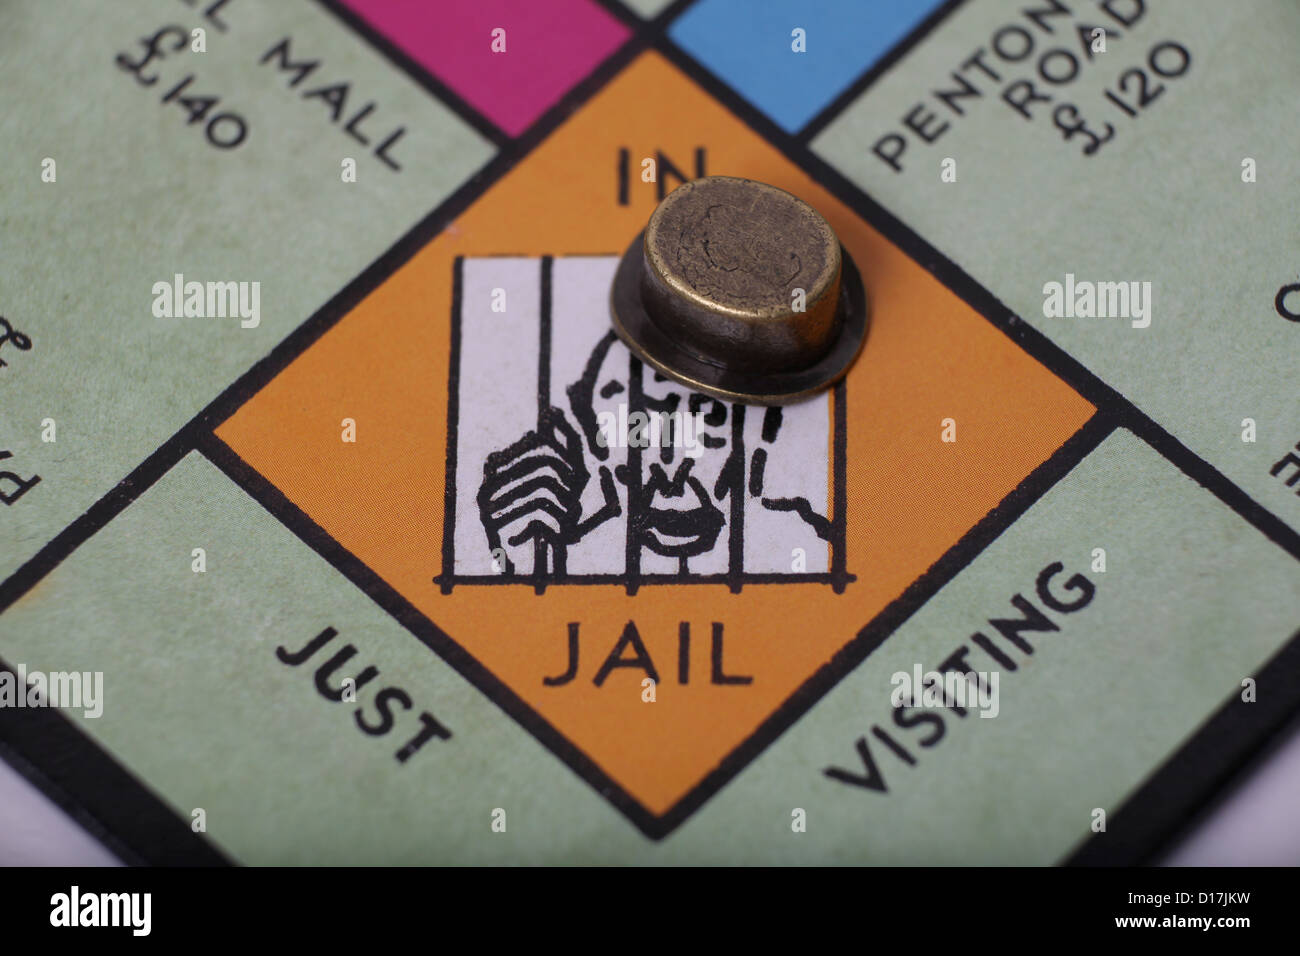 Monopoly In jail square with Top had players piece. Stock Photo